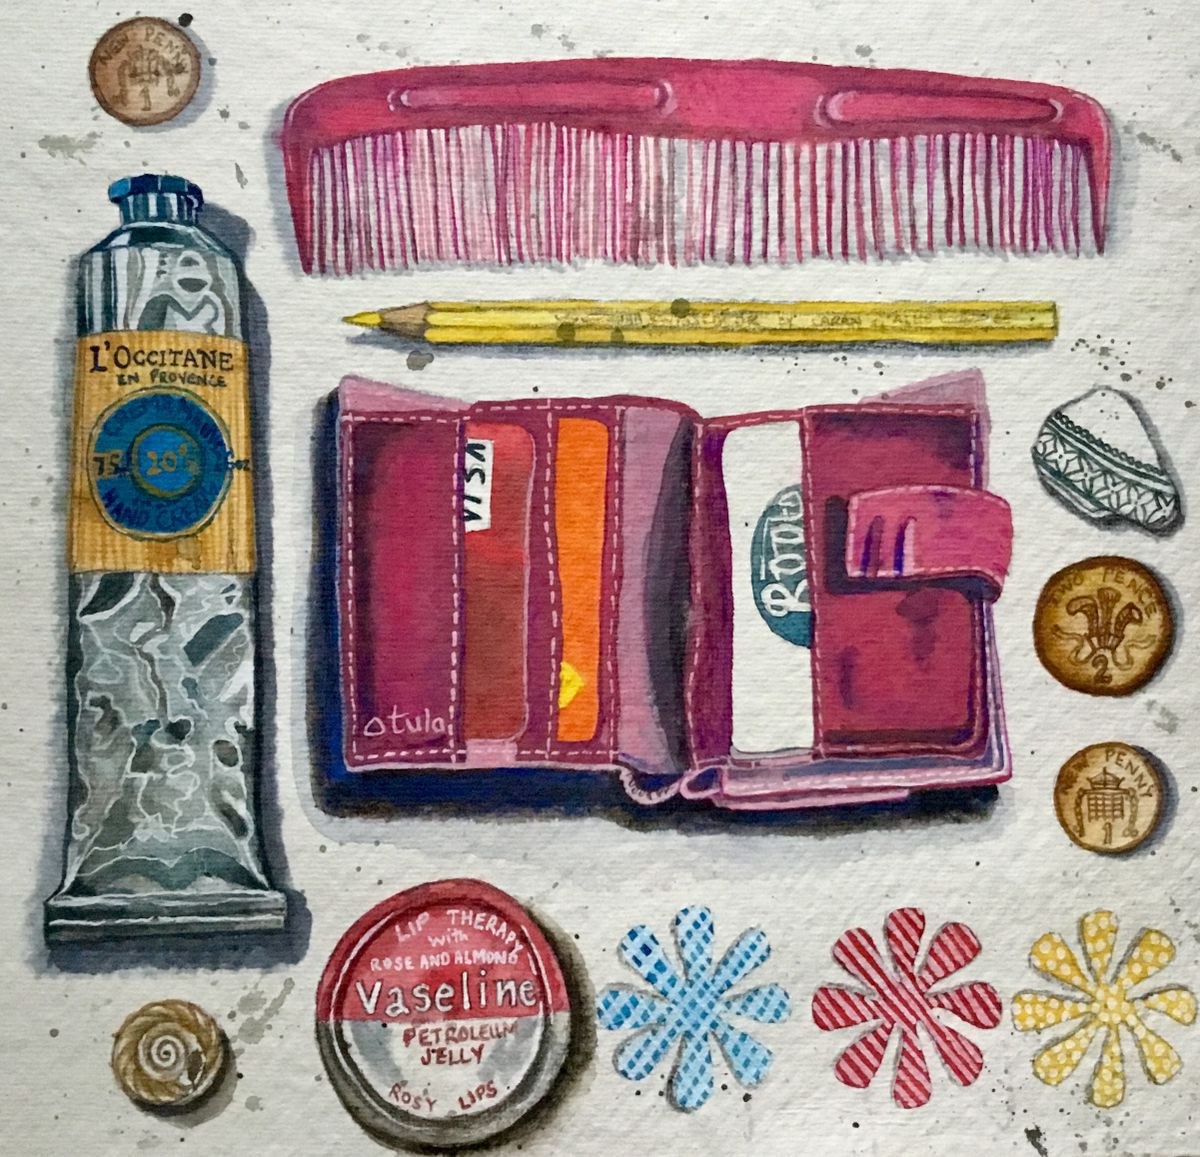 Still life Painting, What’s in my Bag by Janice MacDougall